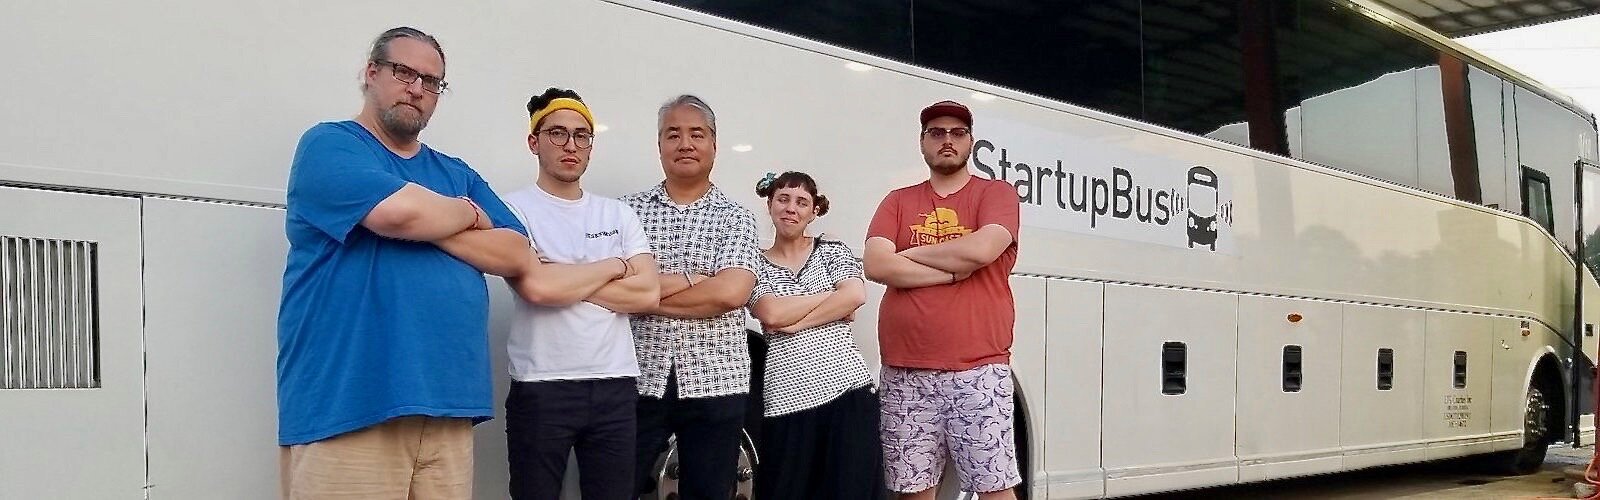 One of the Tampa Bay Area teams on StartupBus Florida 2019.